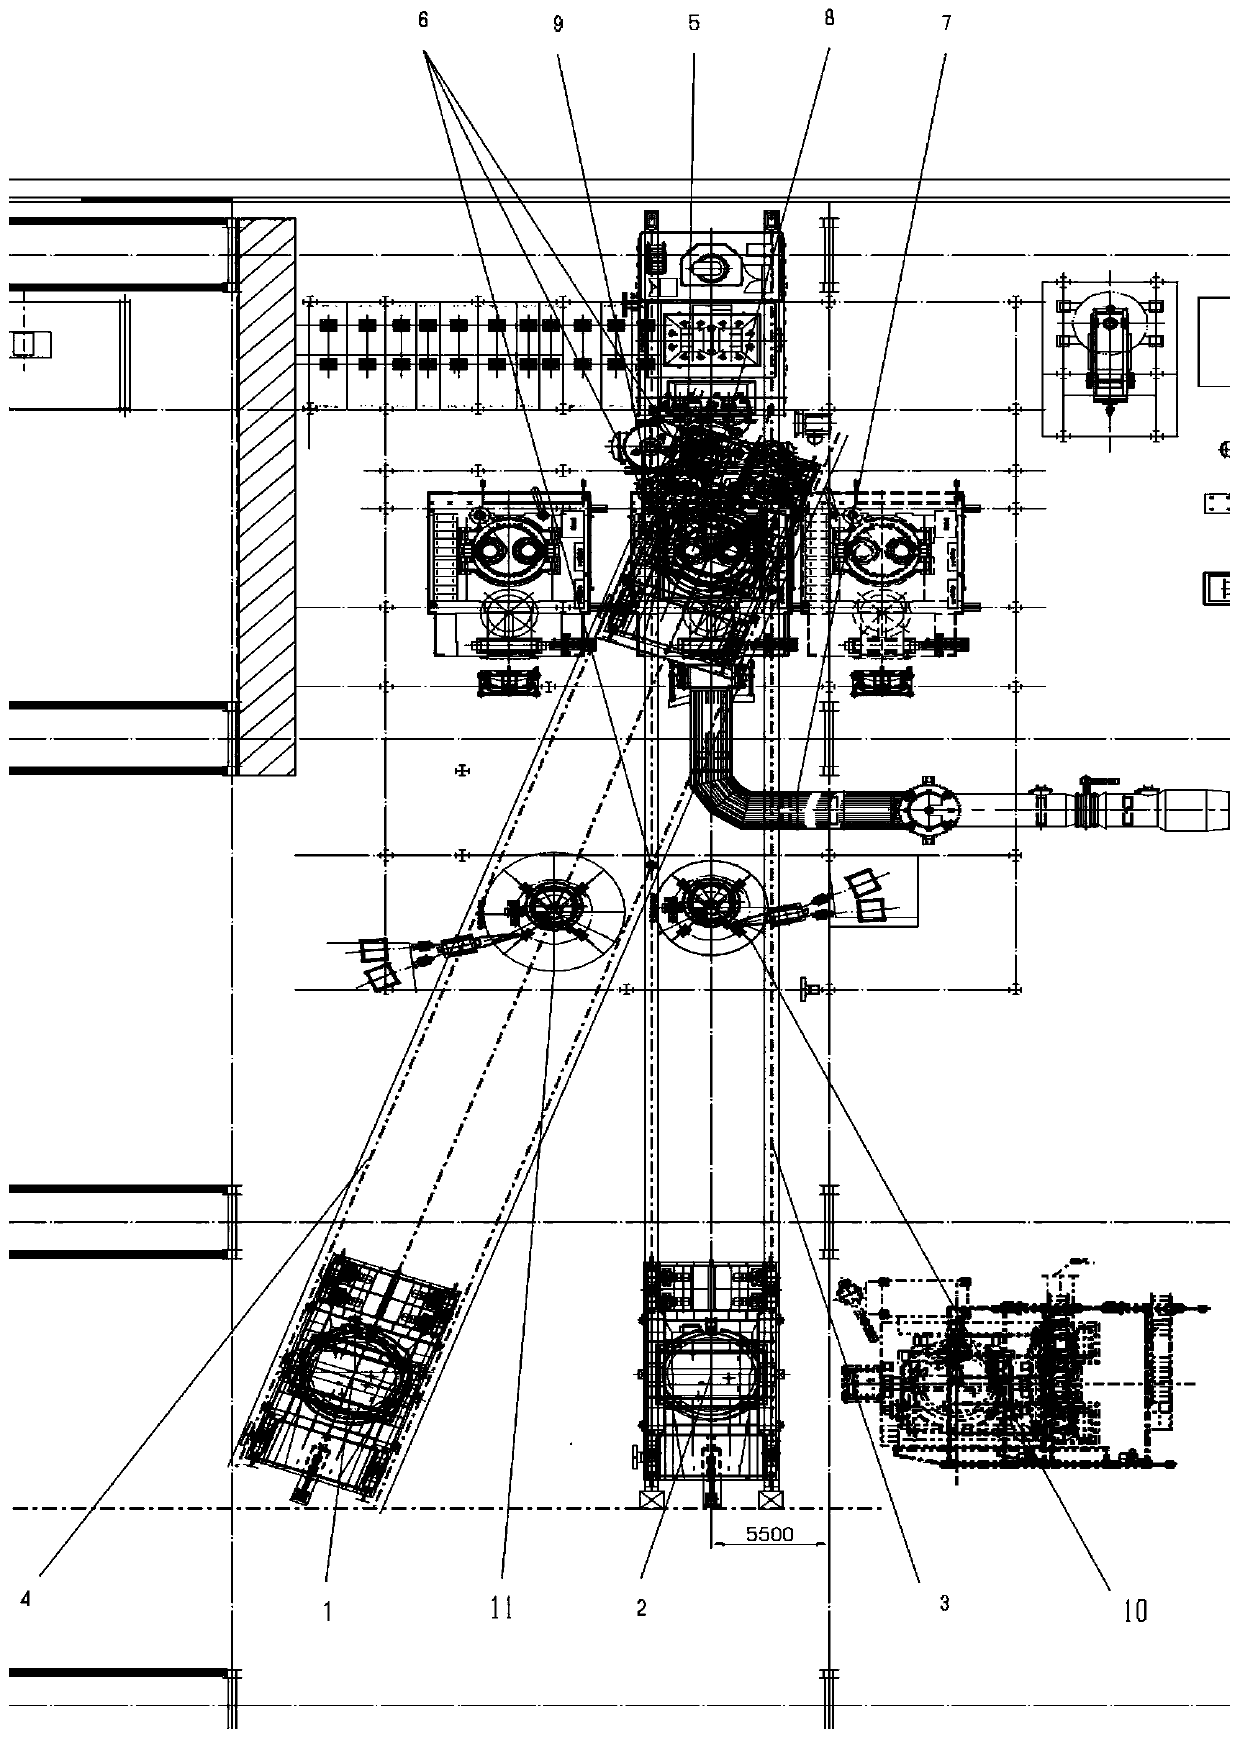 Single-station RH process arrangement method for rail crossing of two molten steel vehicles